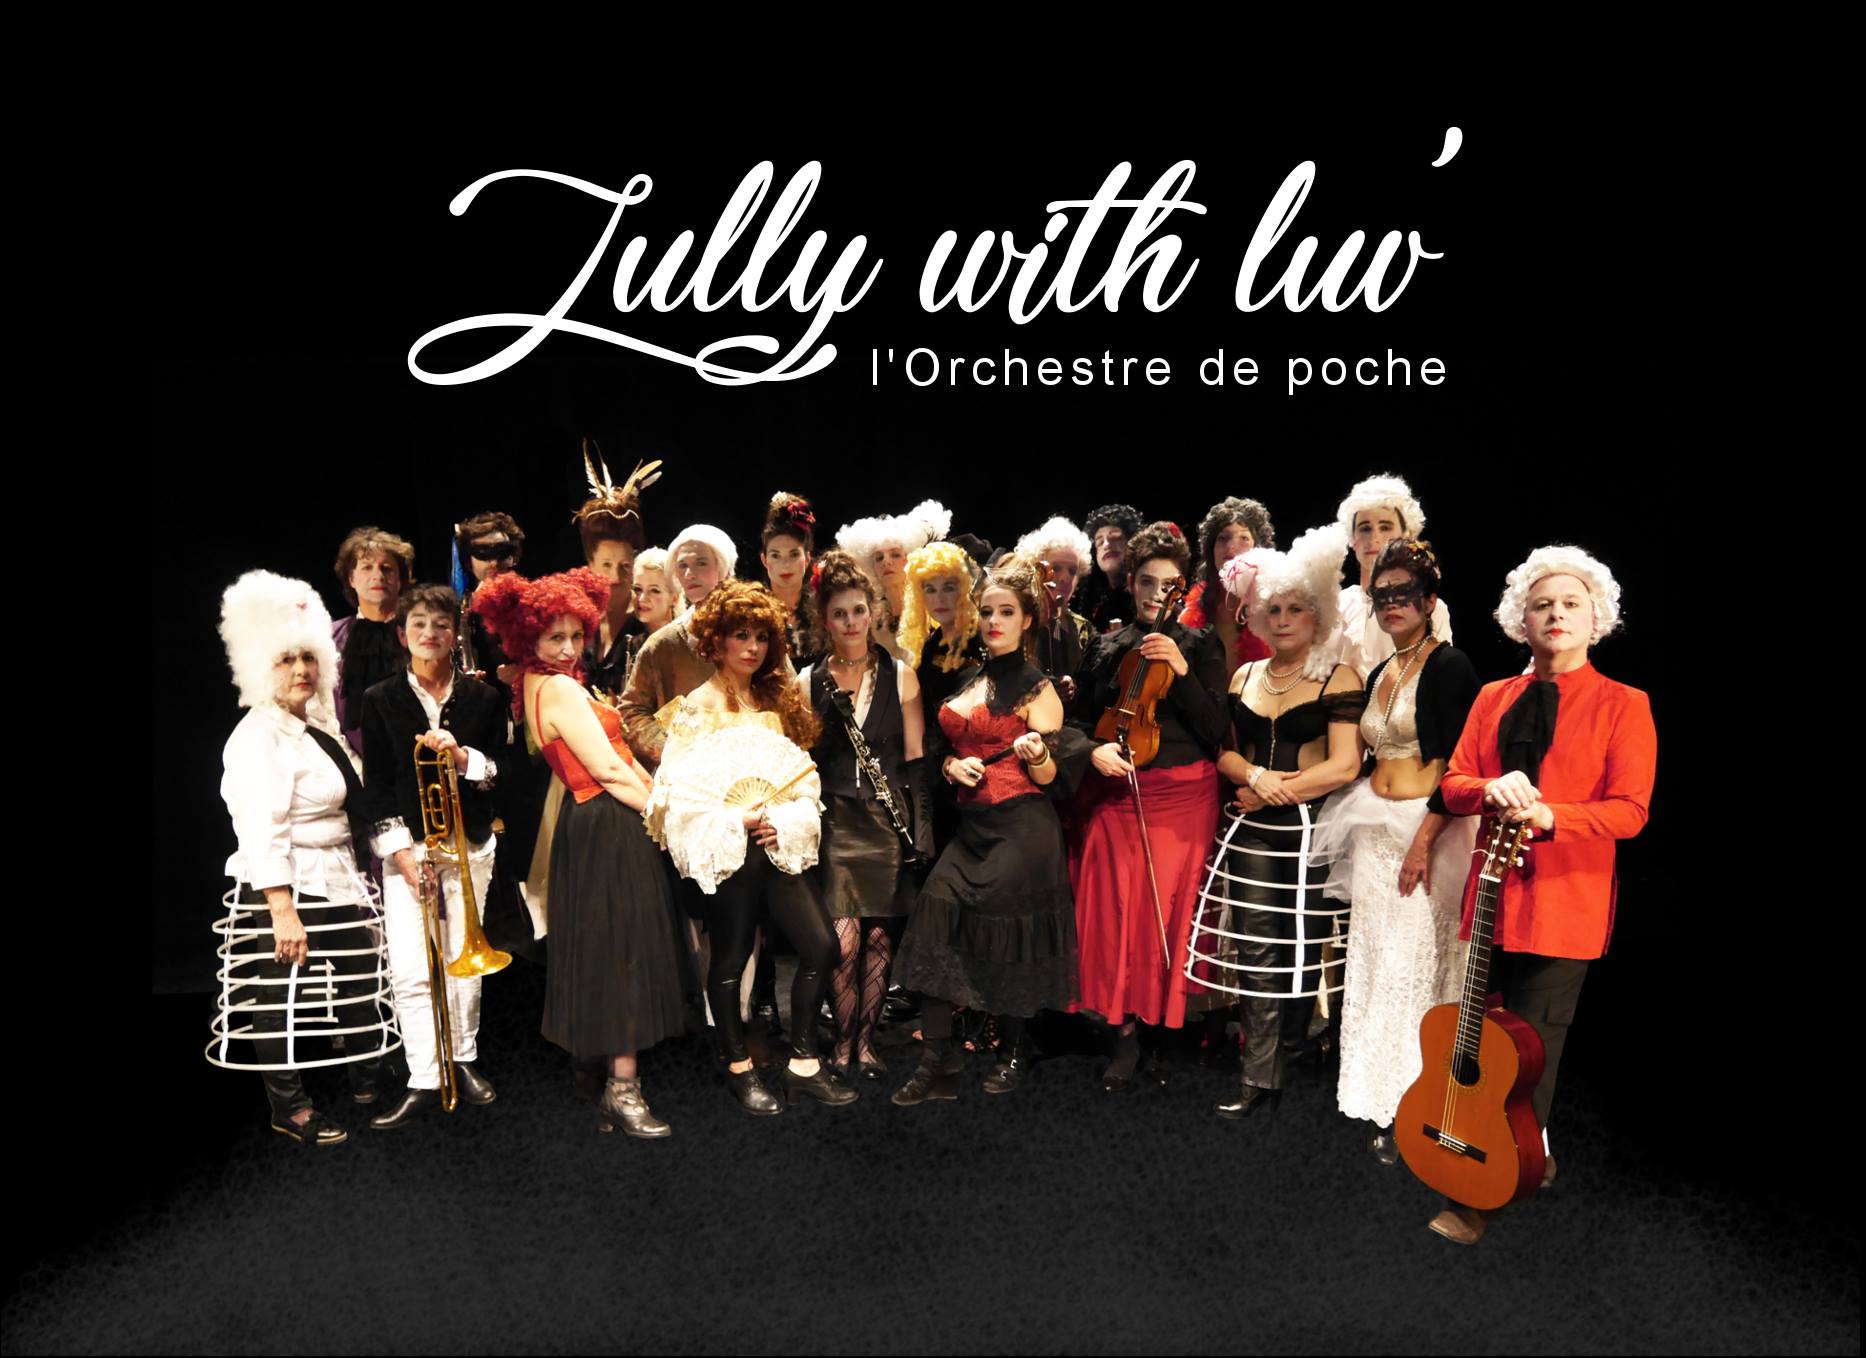 TOURNAGE DU CLIP "LULLY WITH LUV'" — Juin 2018 · Réalisation Cha production